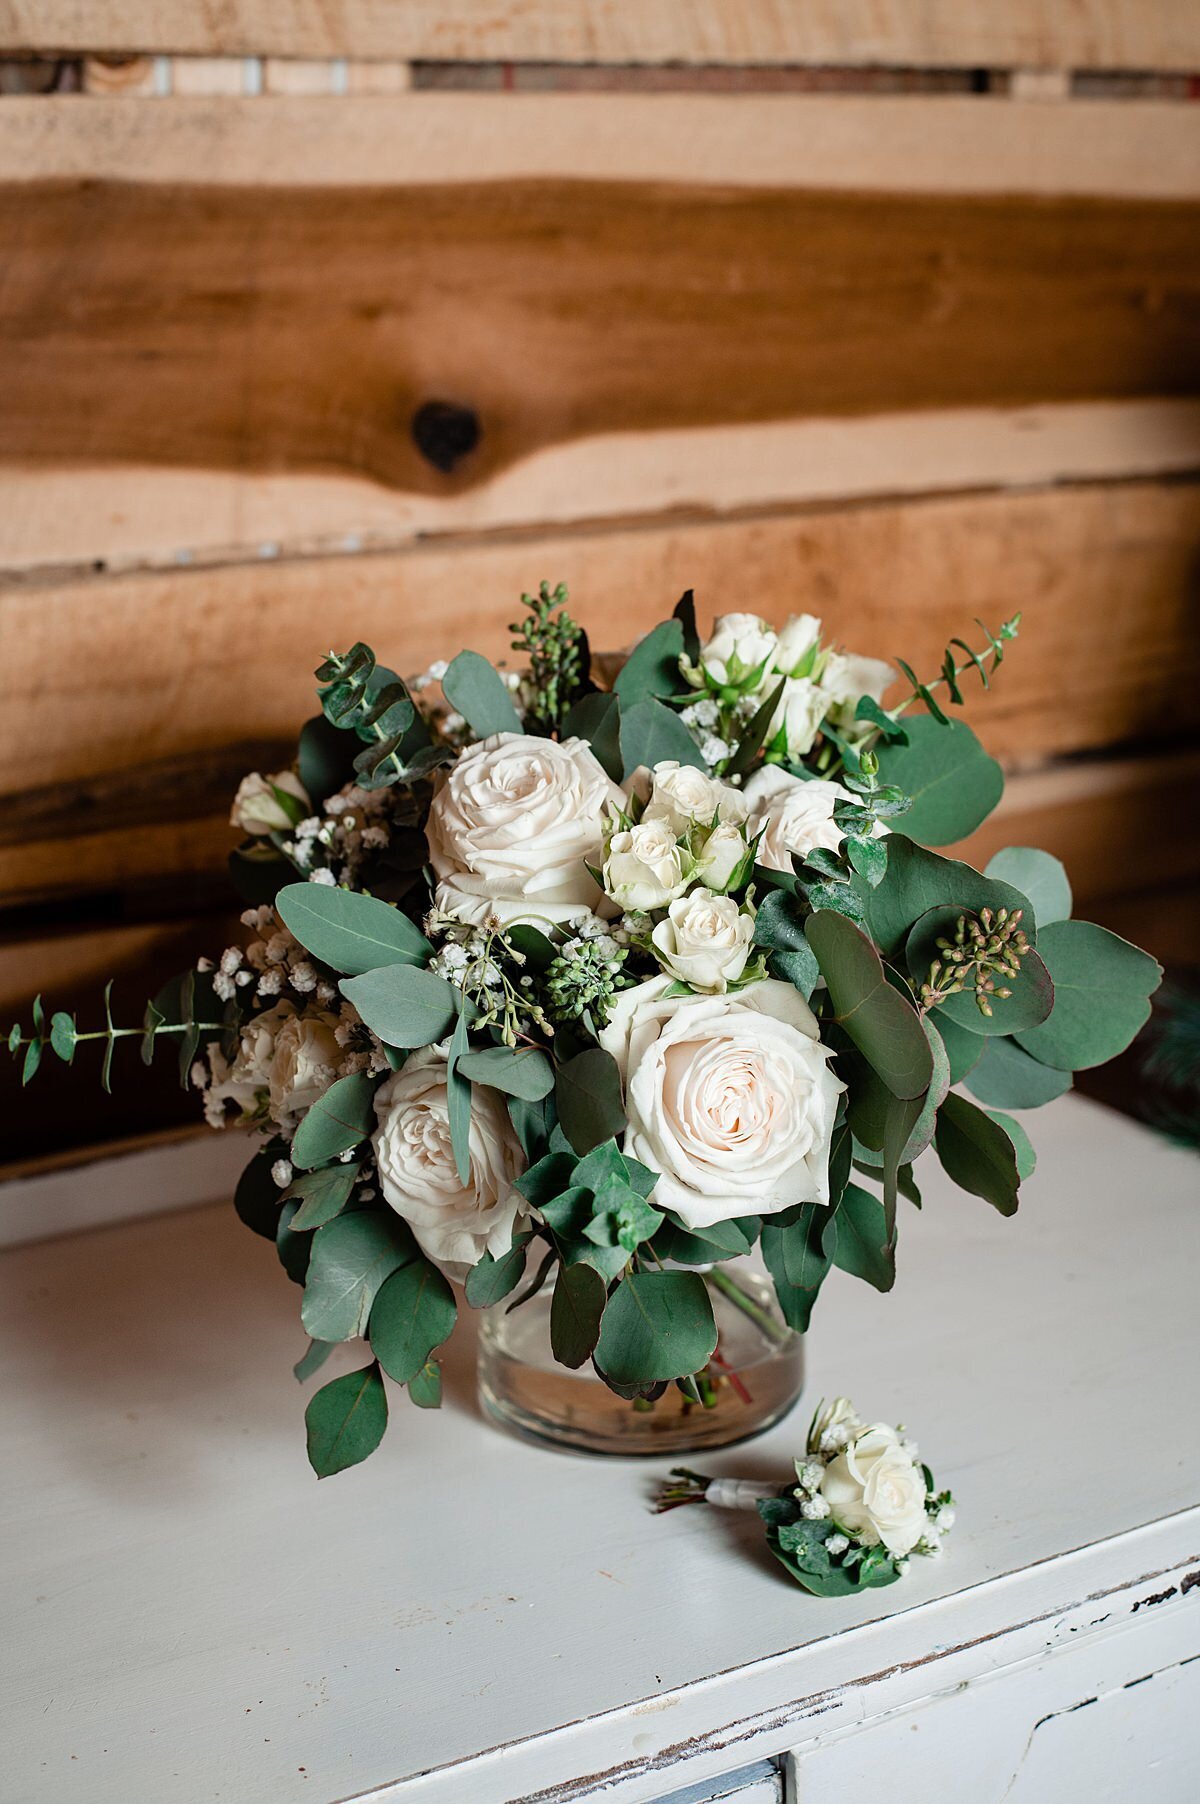 An elegant white bouquet of white roses, seeded eucalyptus, blue eucalyptus and spray roses in a glass vase sitting on a white farm table against a brown barn wall with a matching boutonniere.